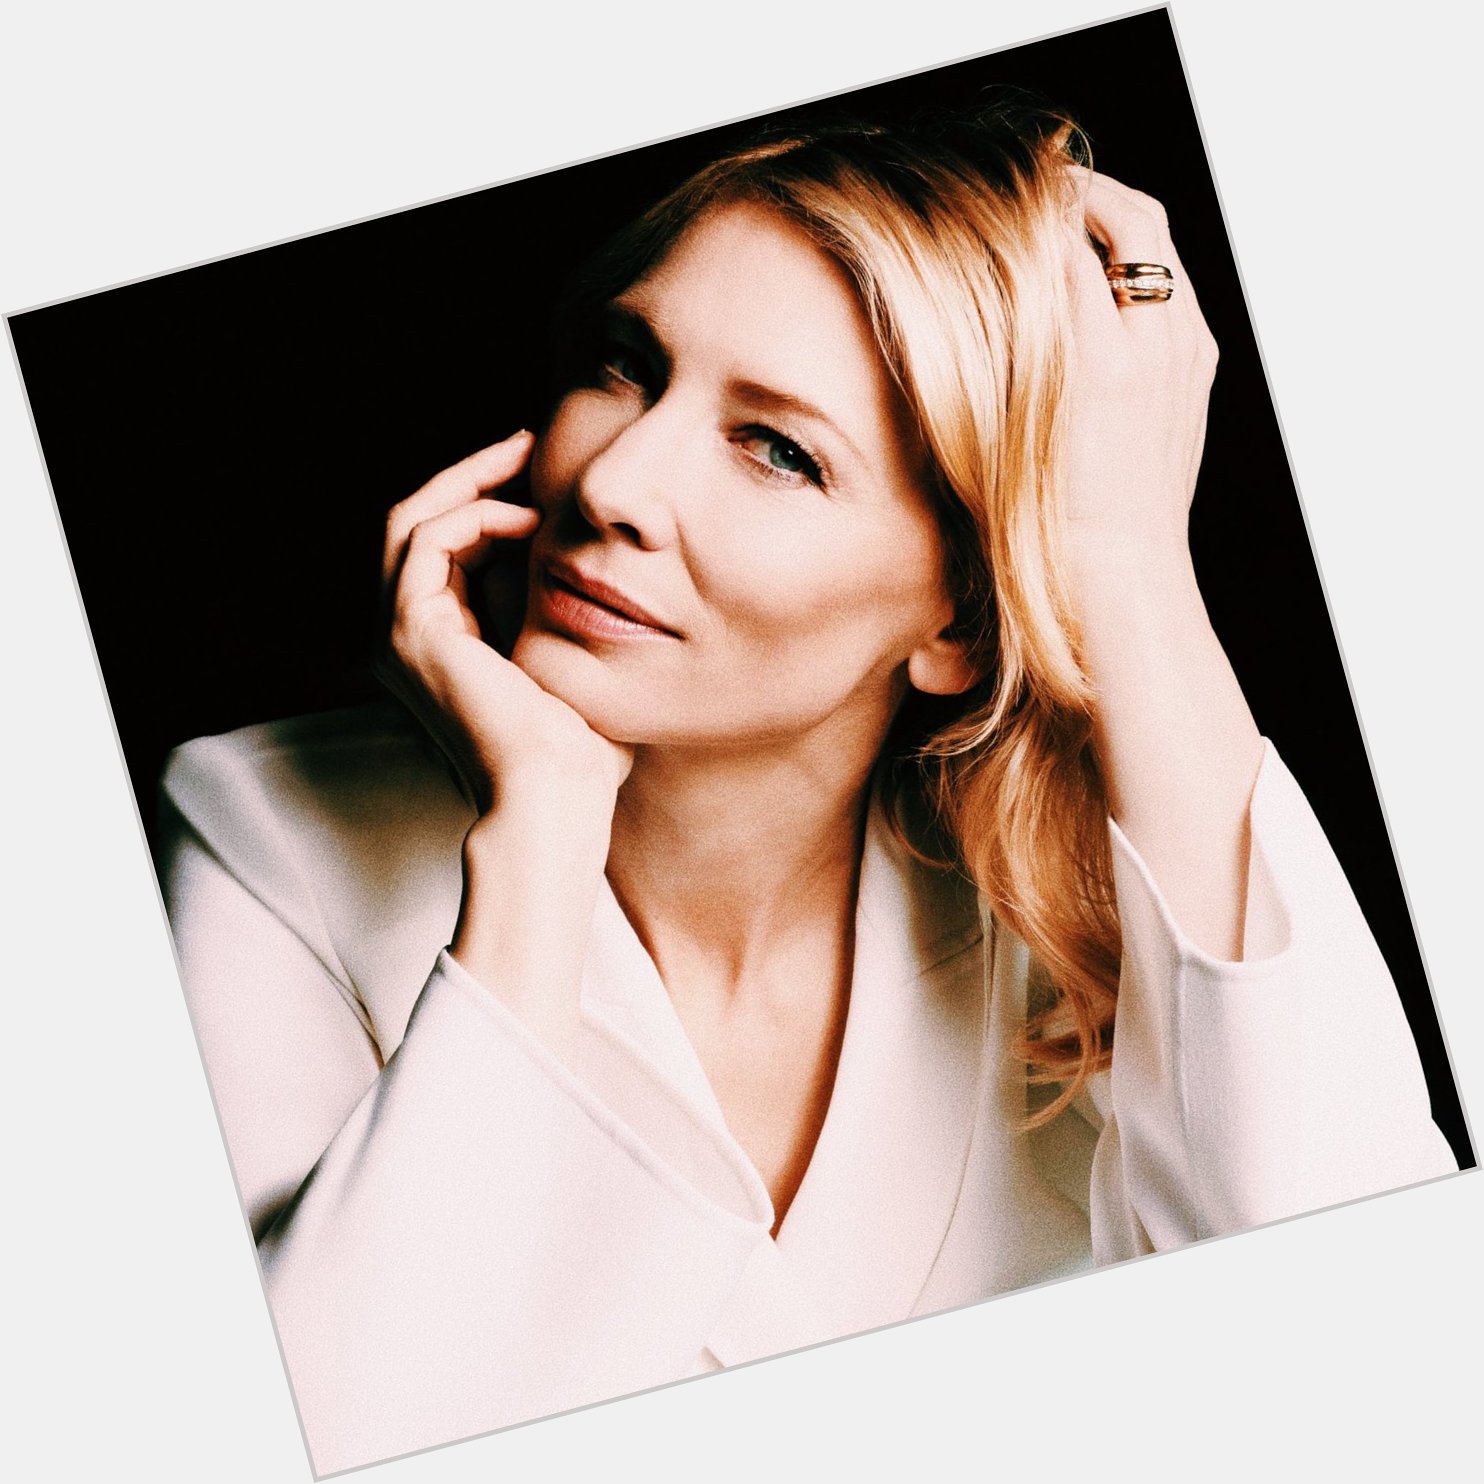   if you know you re going go fail, then fail gloriously happy birthday, queen cate blanchett! 